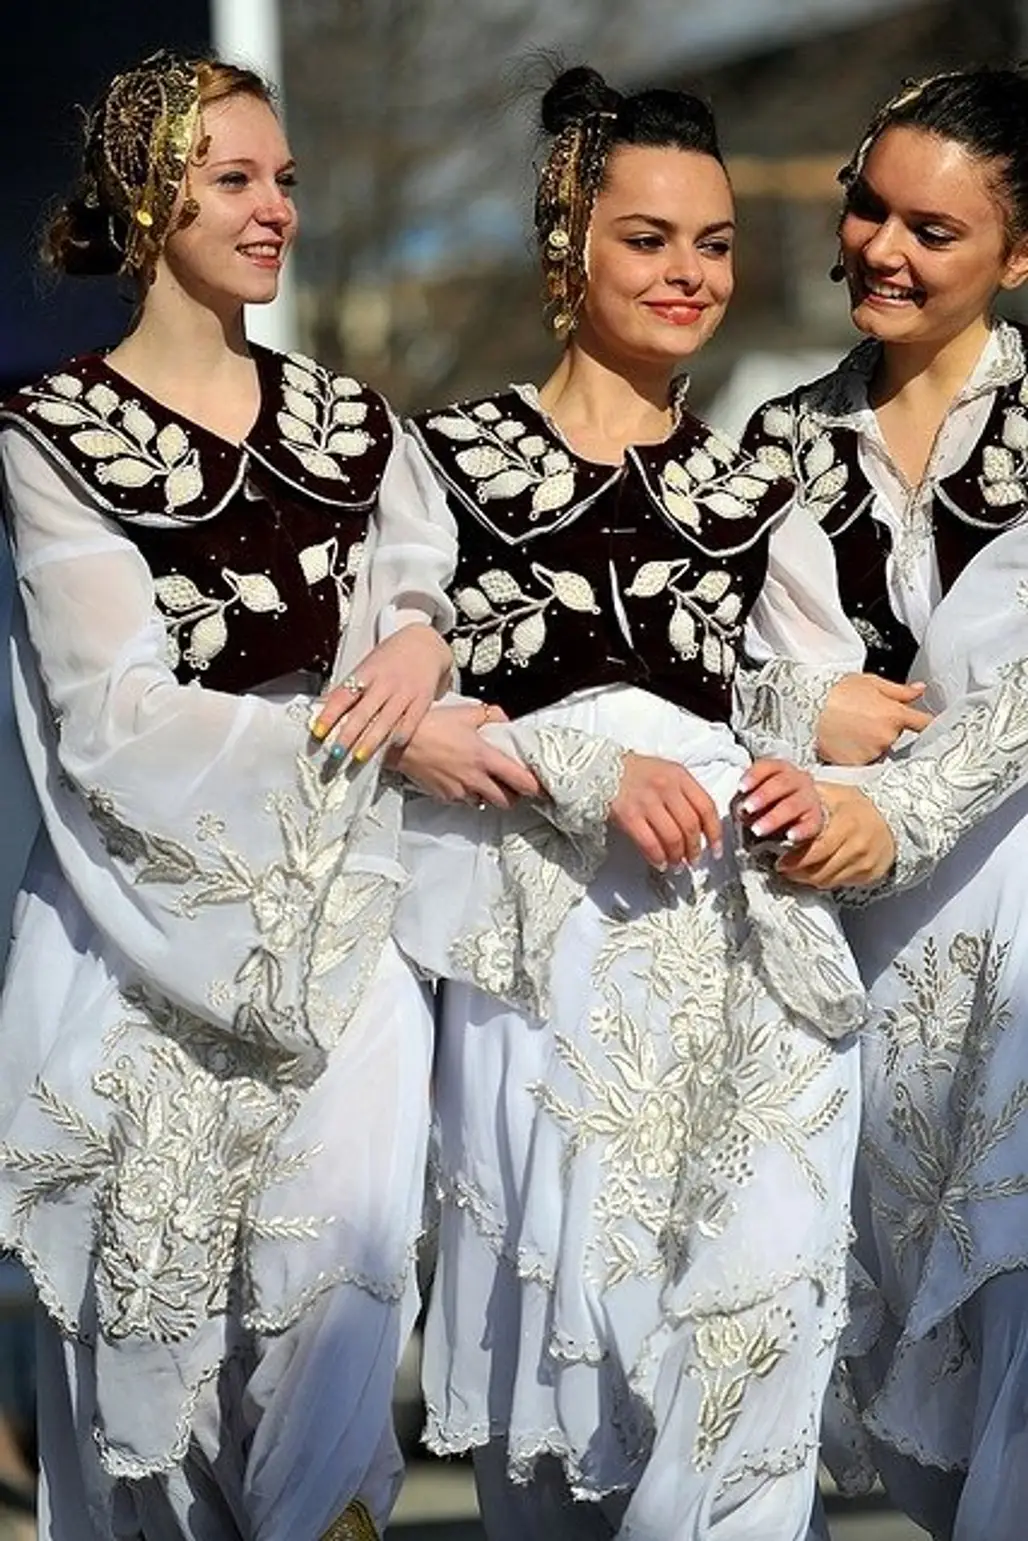 31 Traditional Forms of Dress from Around the World - Culture-ist